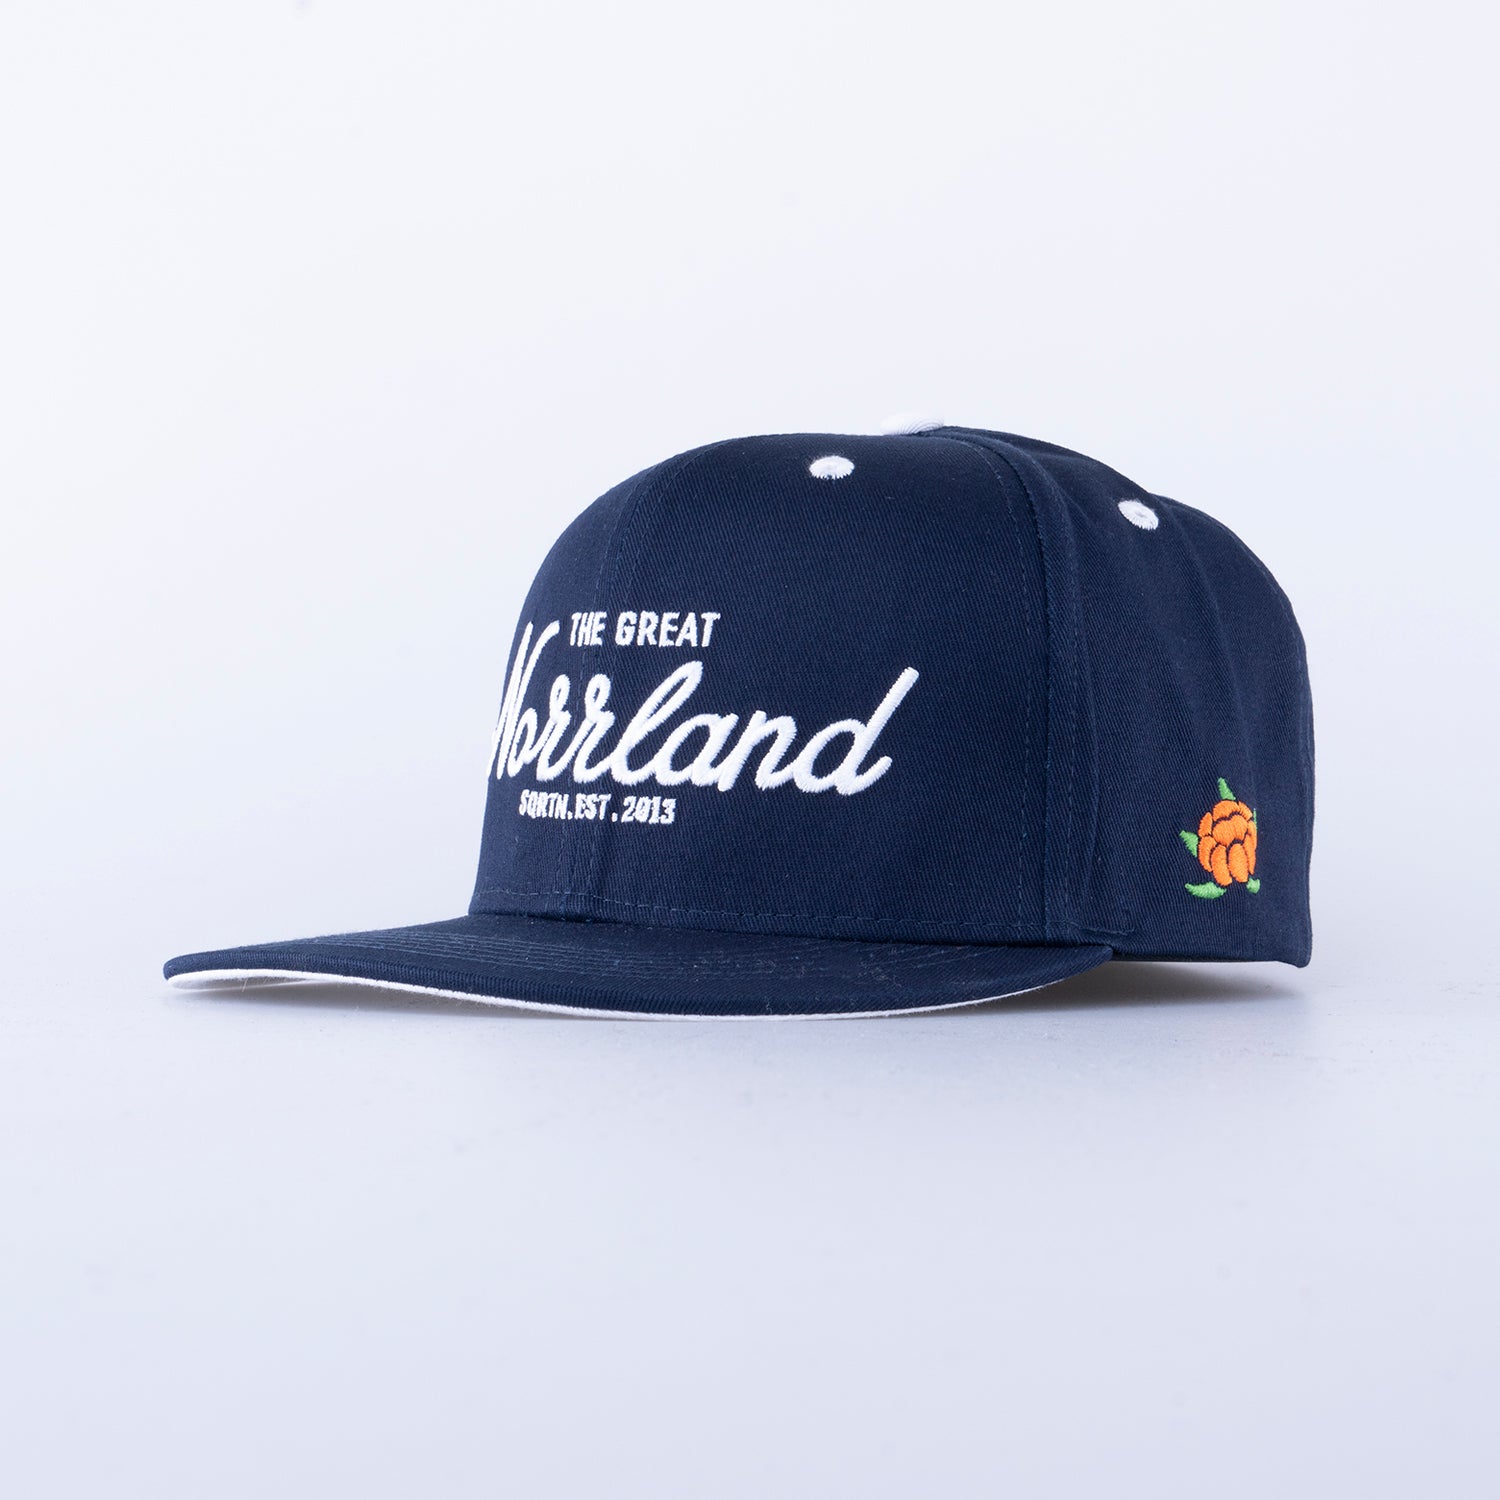 GREAT NORRLAND KEPS - NAVY